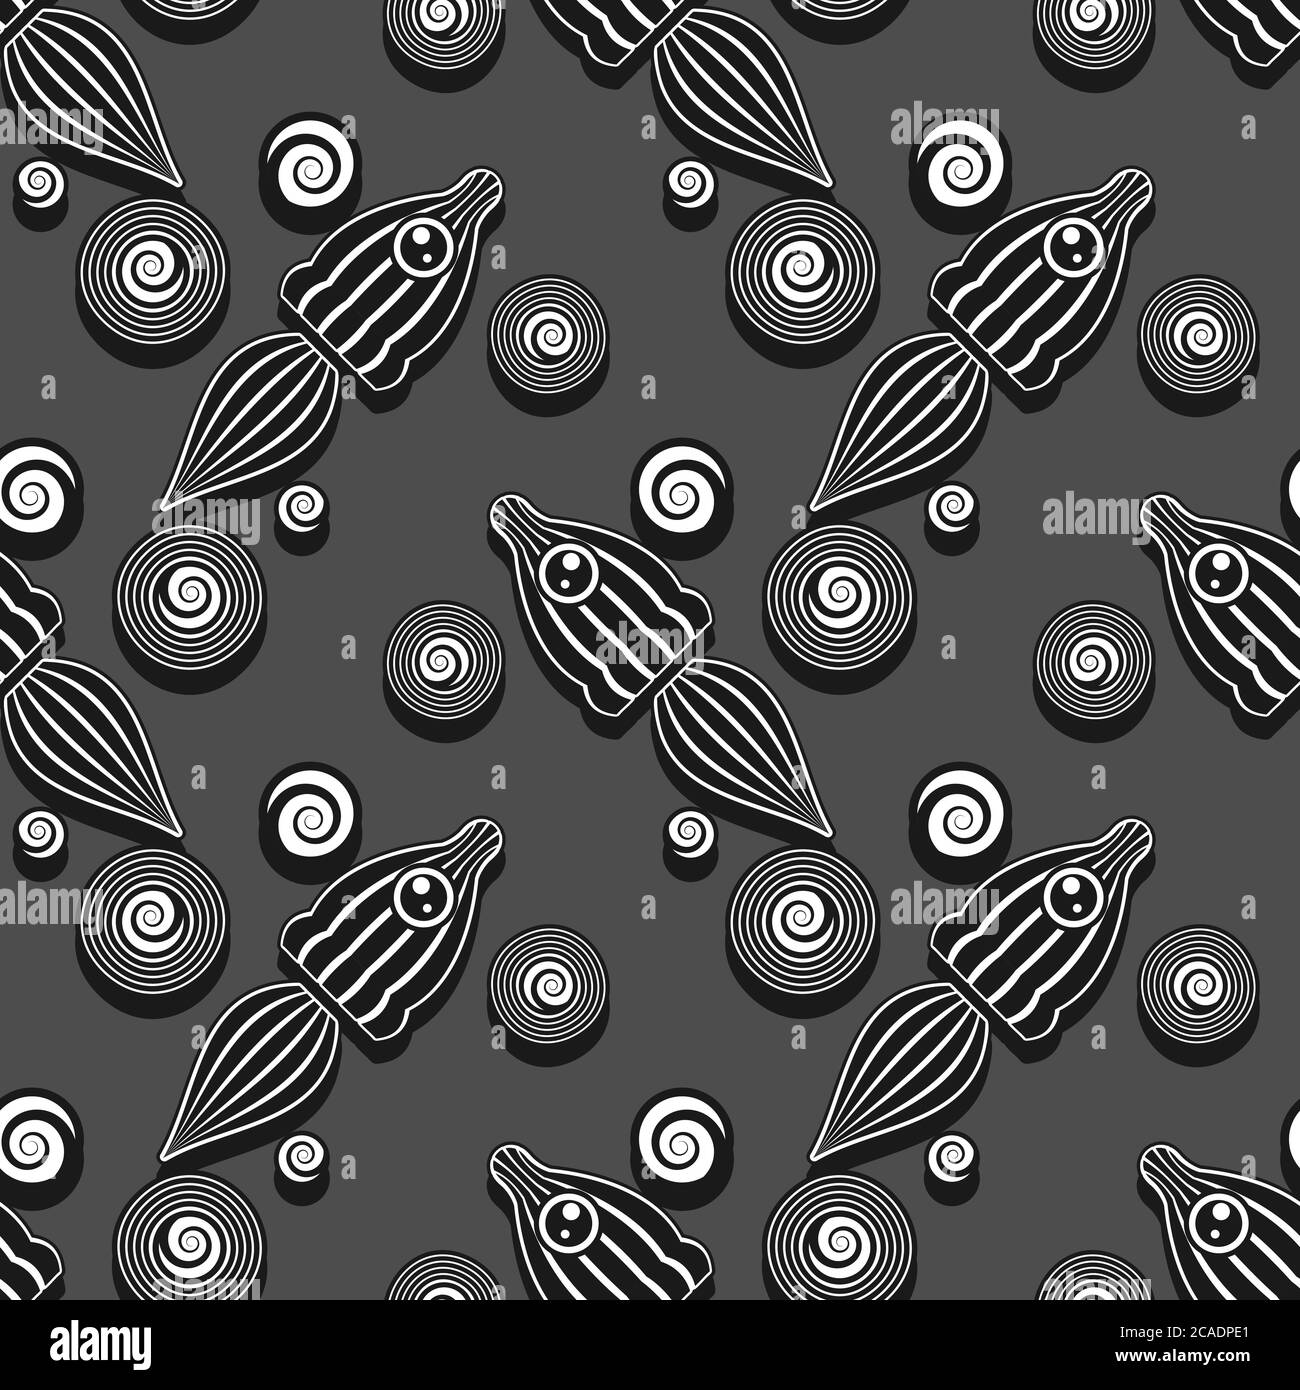 seamless abstract pattern of a striped rocket flying on a dark background. vector image Stock Vector